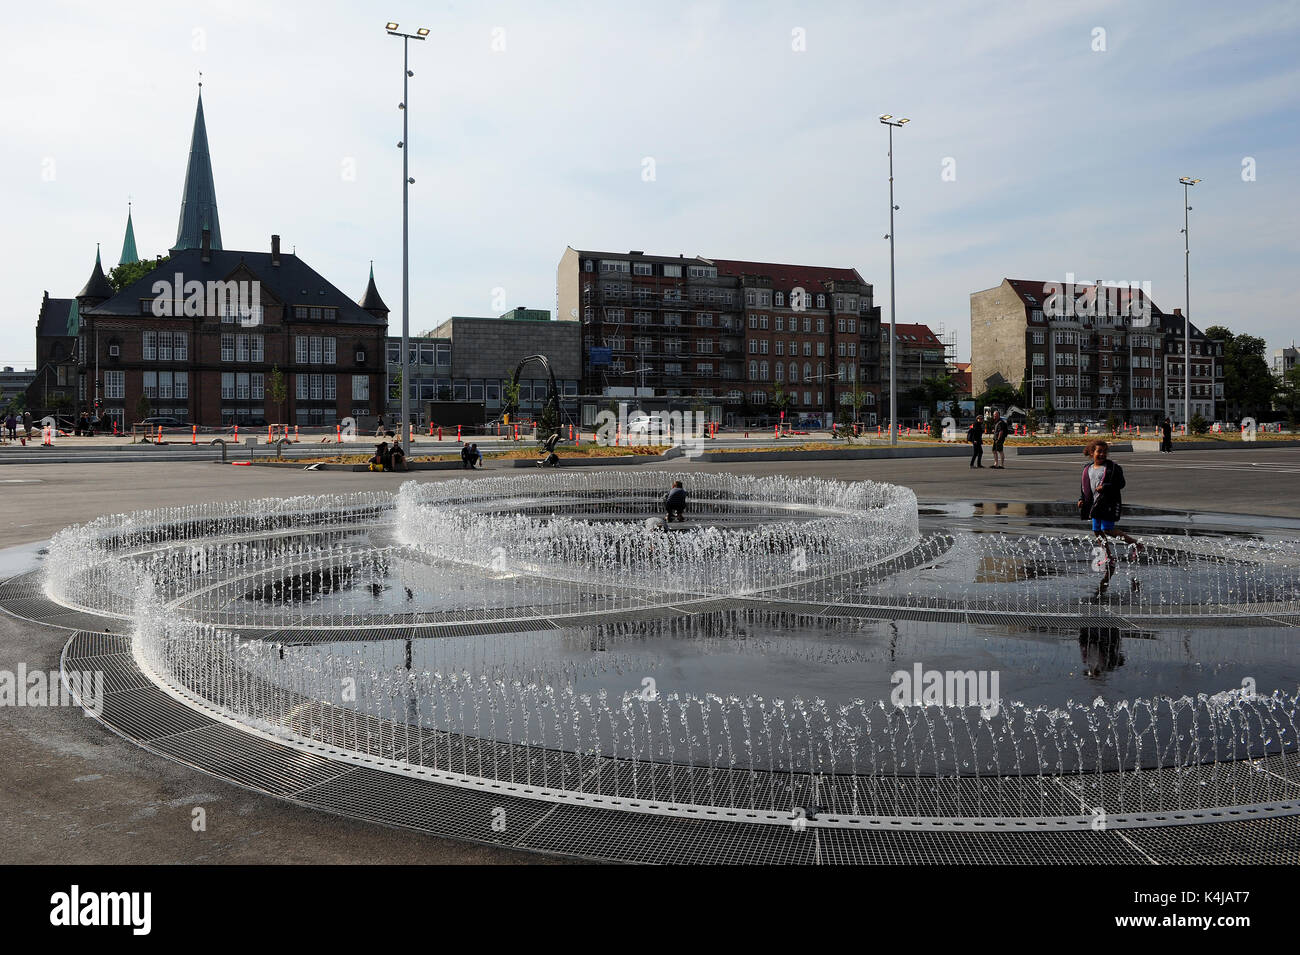 Children playing in the new Endless Connection installation by artist Jeppe Hein on the waterfront in Aarhus. Stock Photo